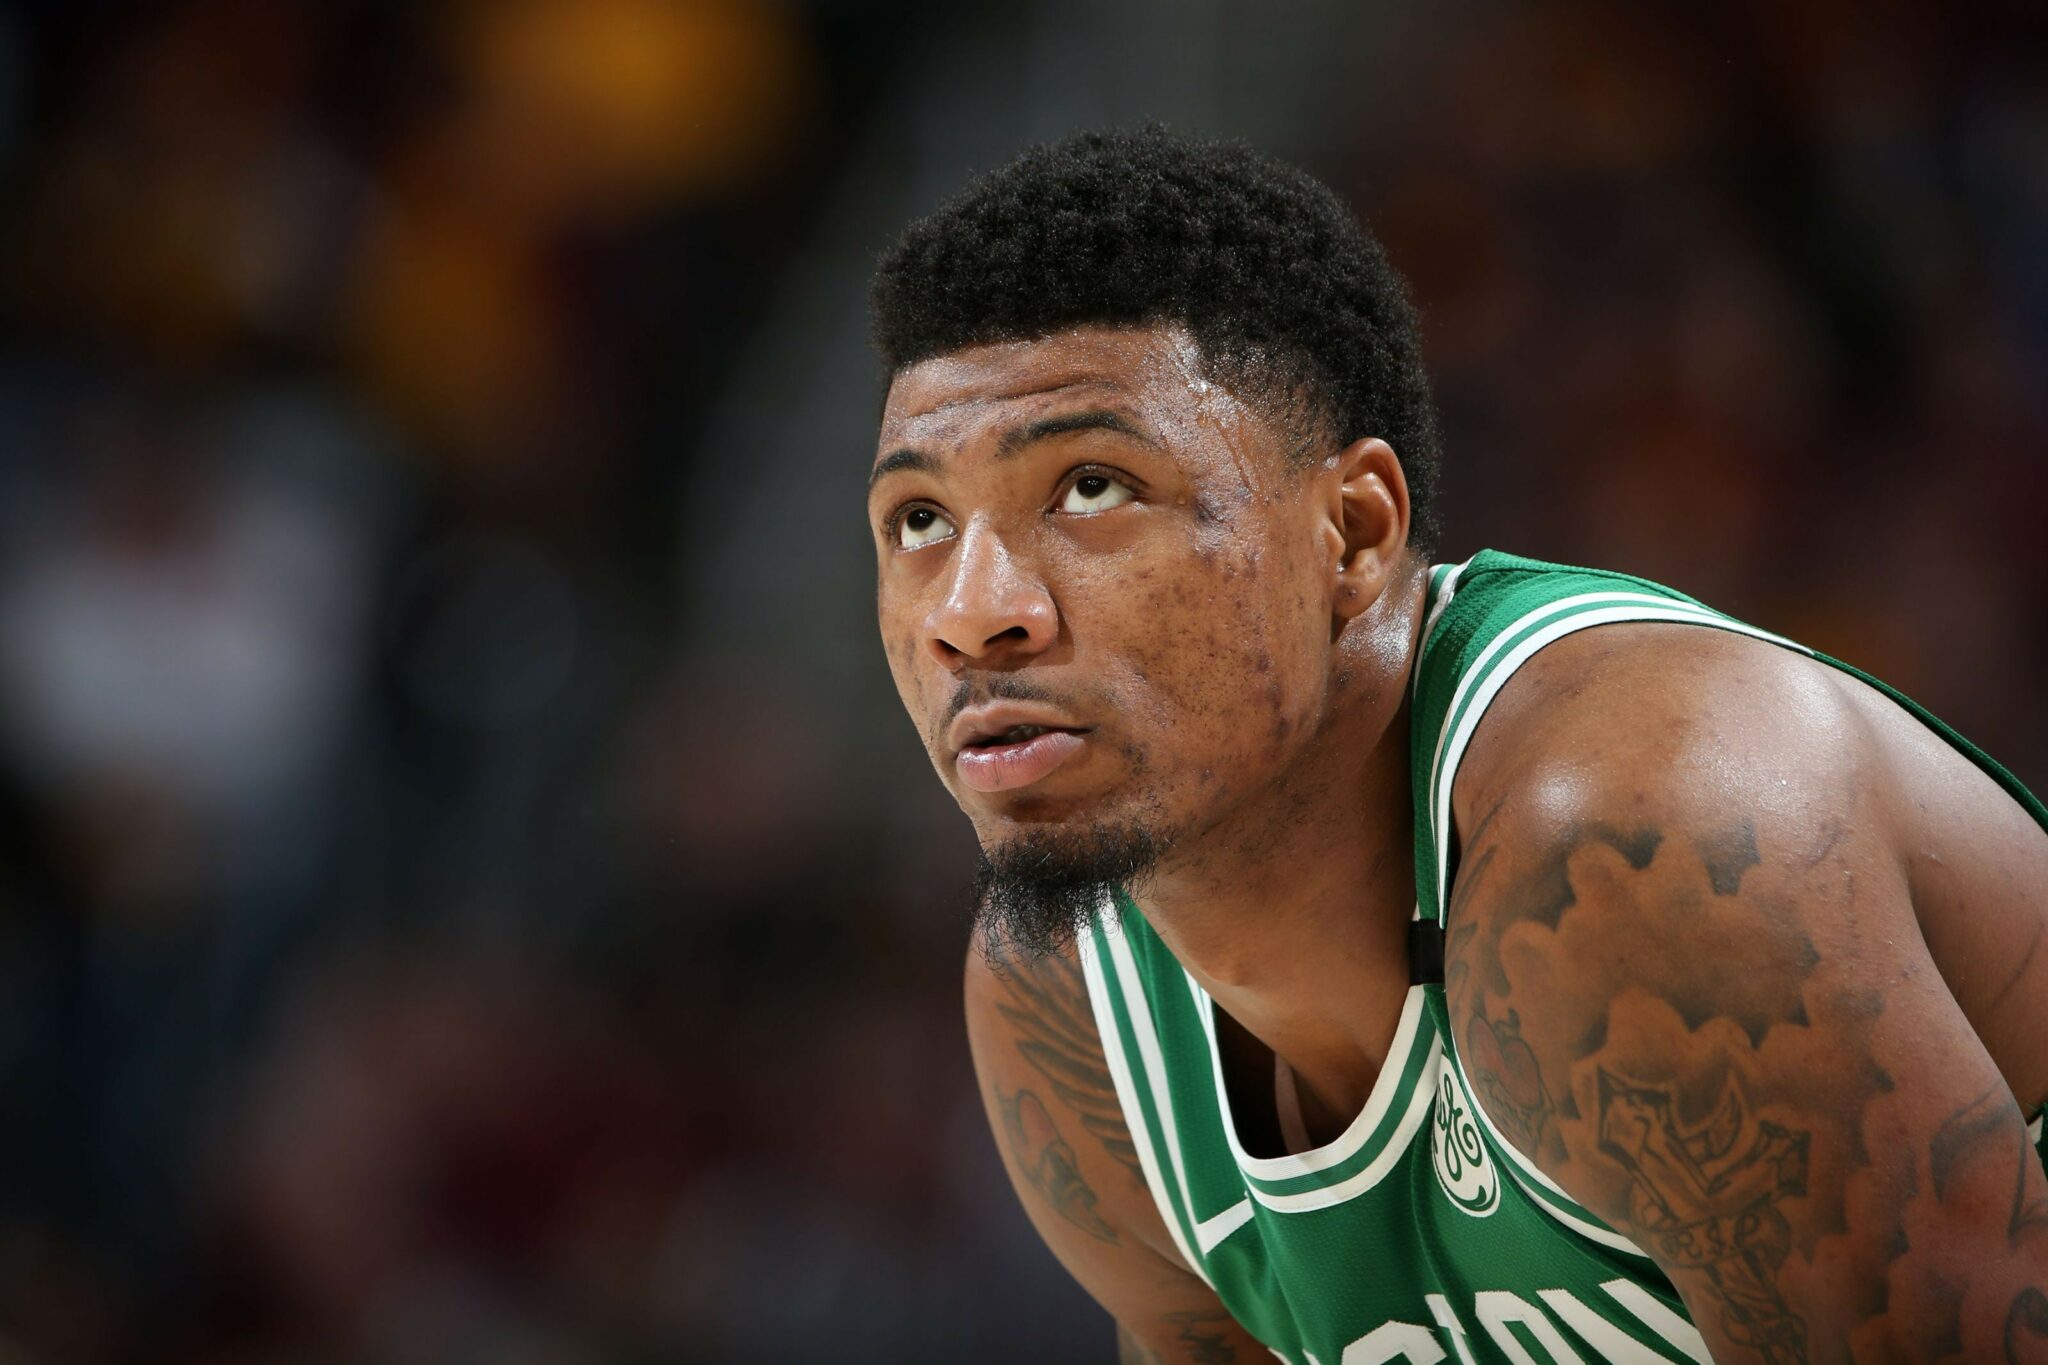 7. Marcus Smart's Blue Hair Becomes Talk of the Town in Boston - wide 5